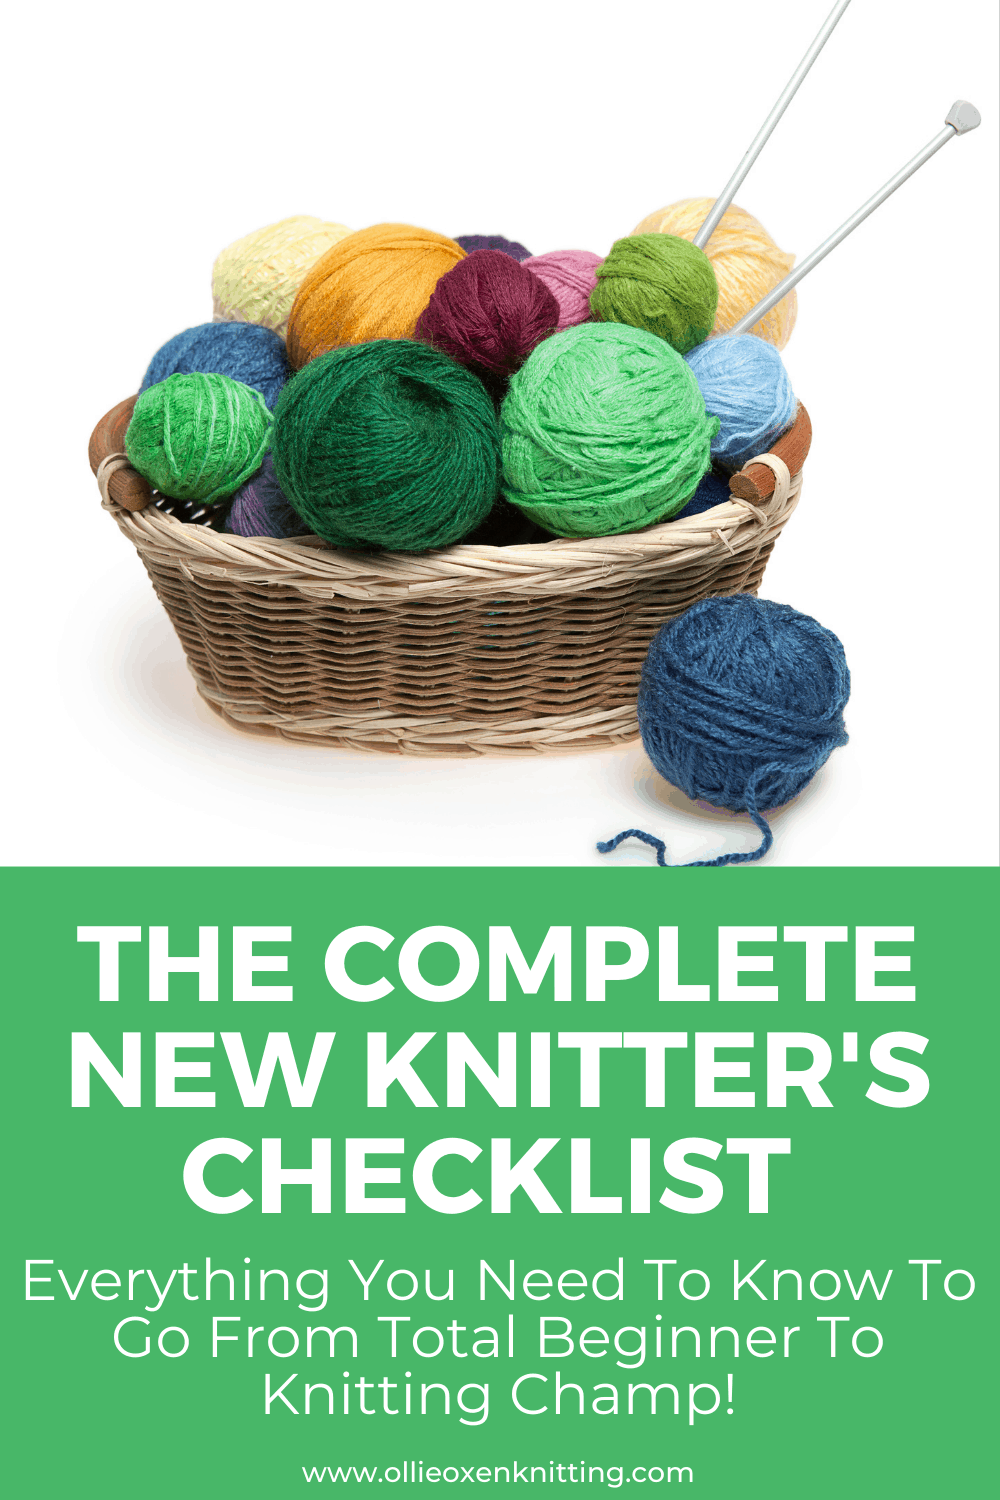 The Complete New Knitter's Checklist: Everything You Need To Know To Go From Total Beginner To Knitting Champ! | Ollie Oxen Knitting